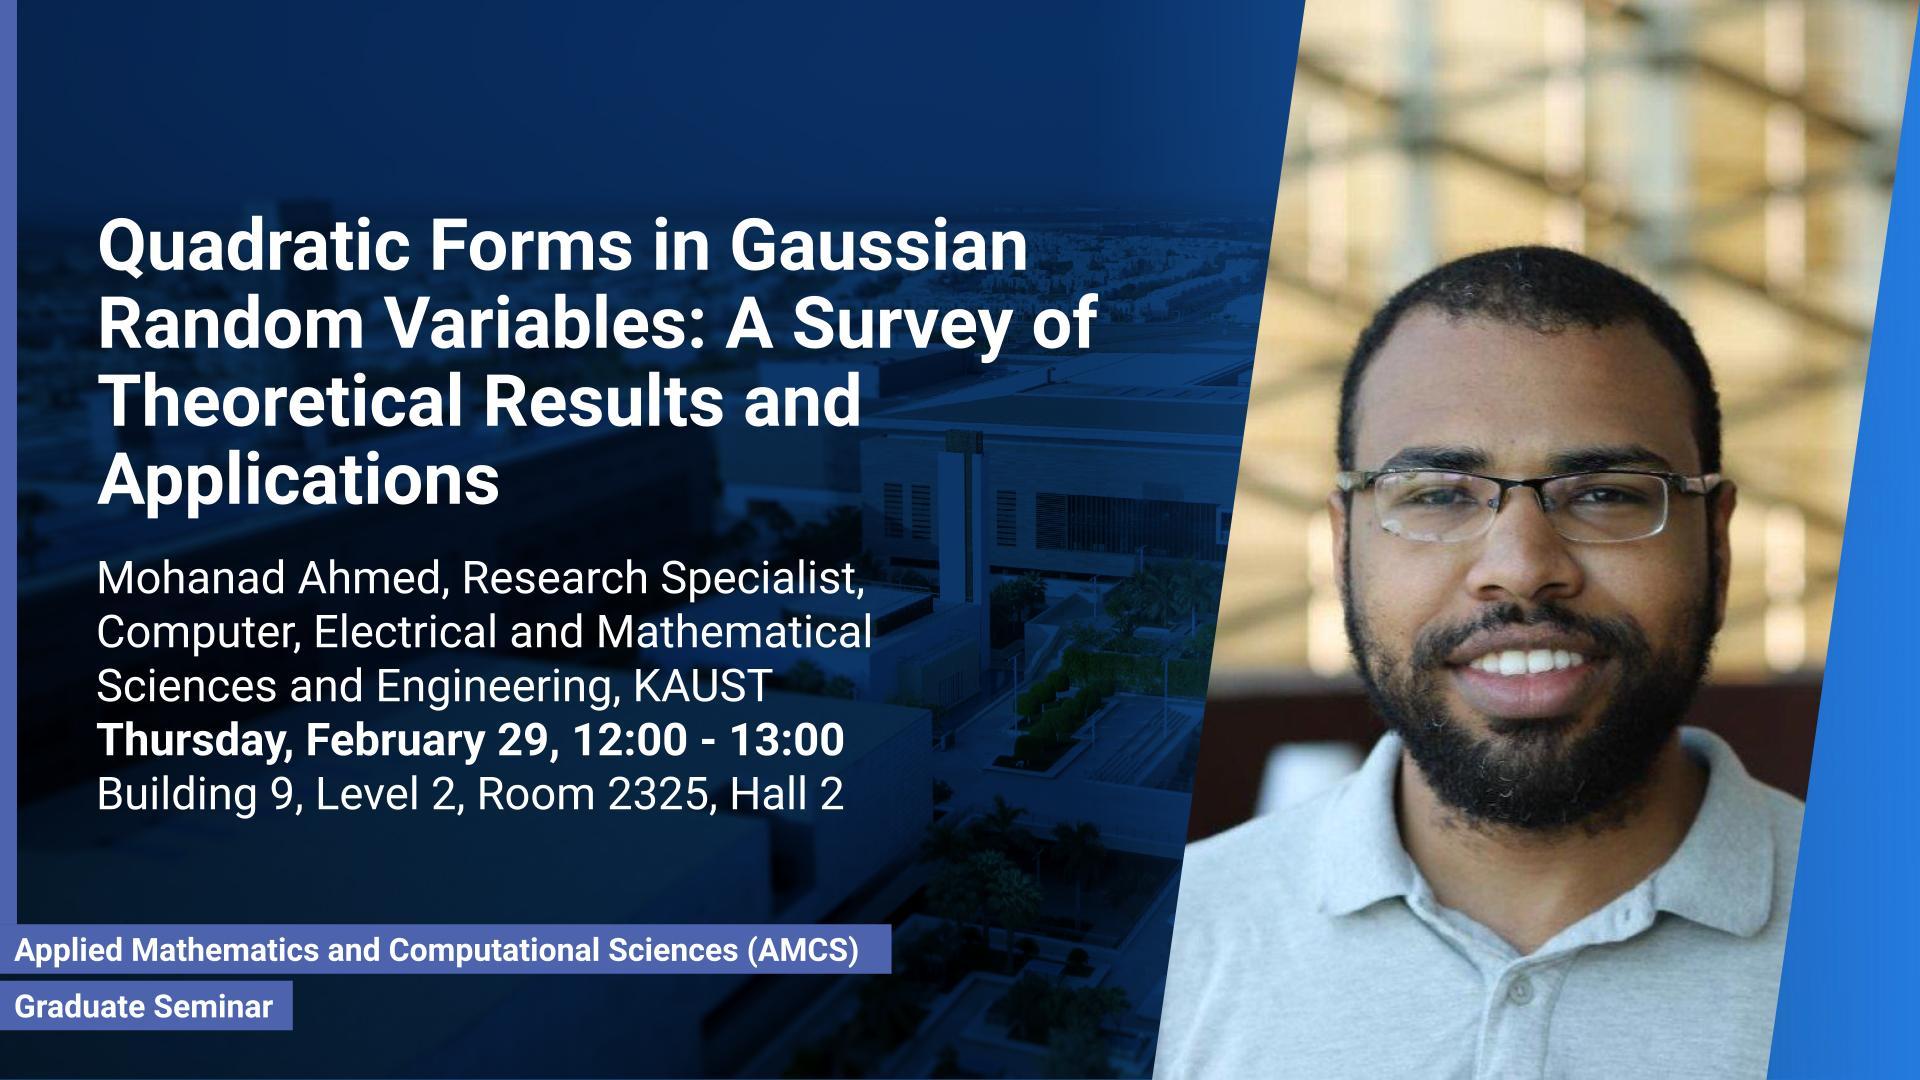 KAUST-CEMSE-AMCS-STAT-Mohanad Ahmed-Quadratic Forms in Gaussian Random Variables A Survey of Theoretical Results and Applications.jpg